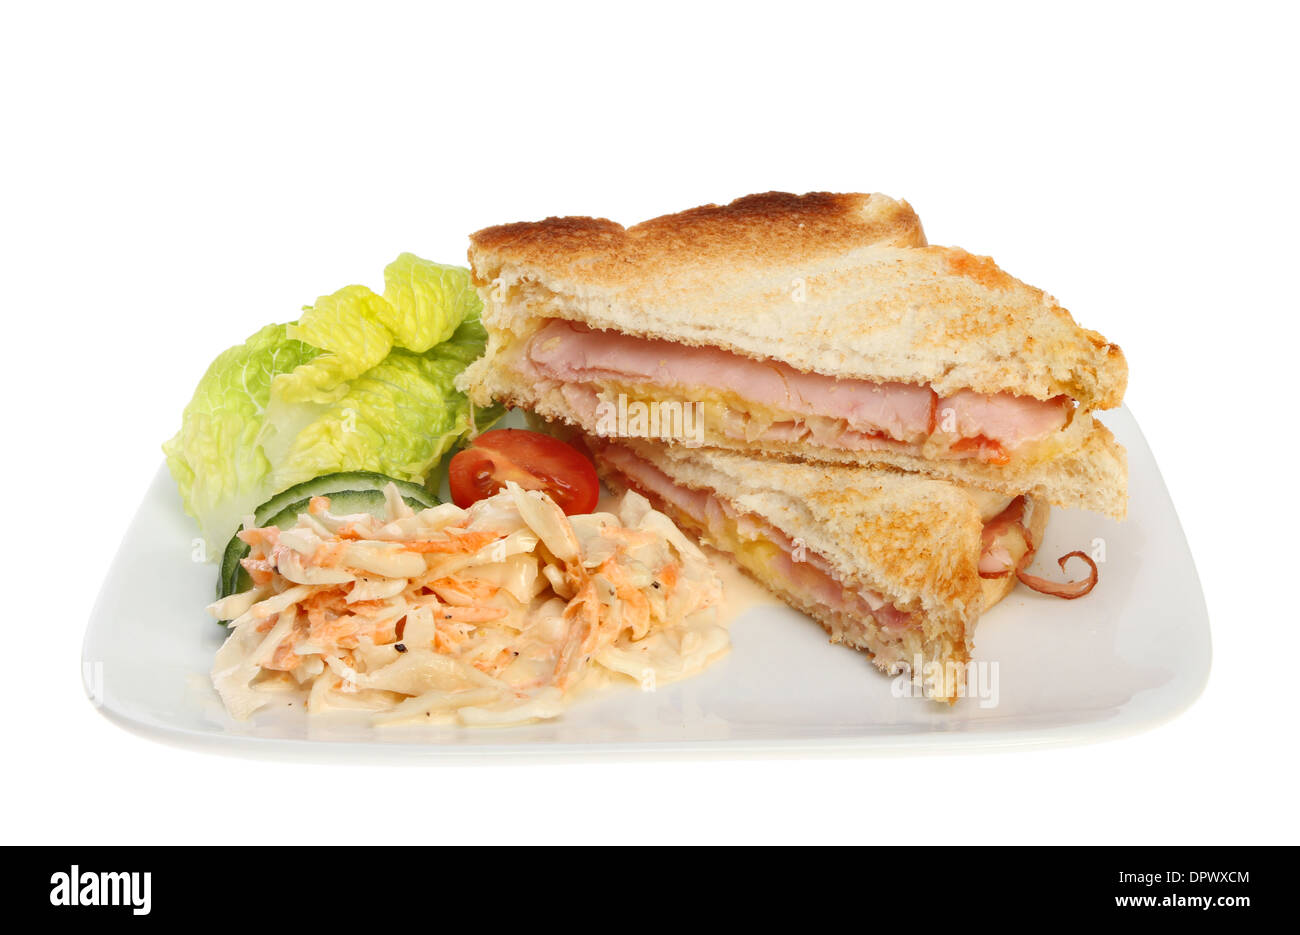 Toasted cheese and ham sandwich with salad on a plate isolated against white Stock Photo